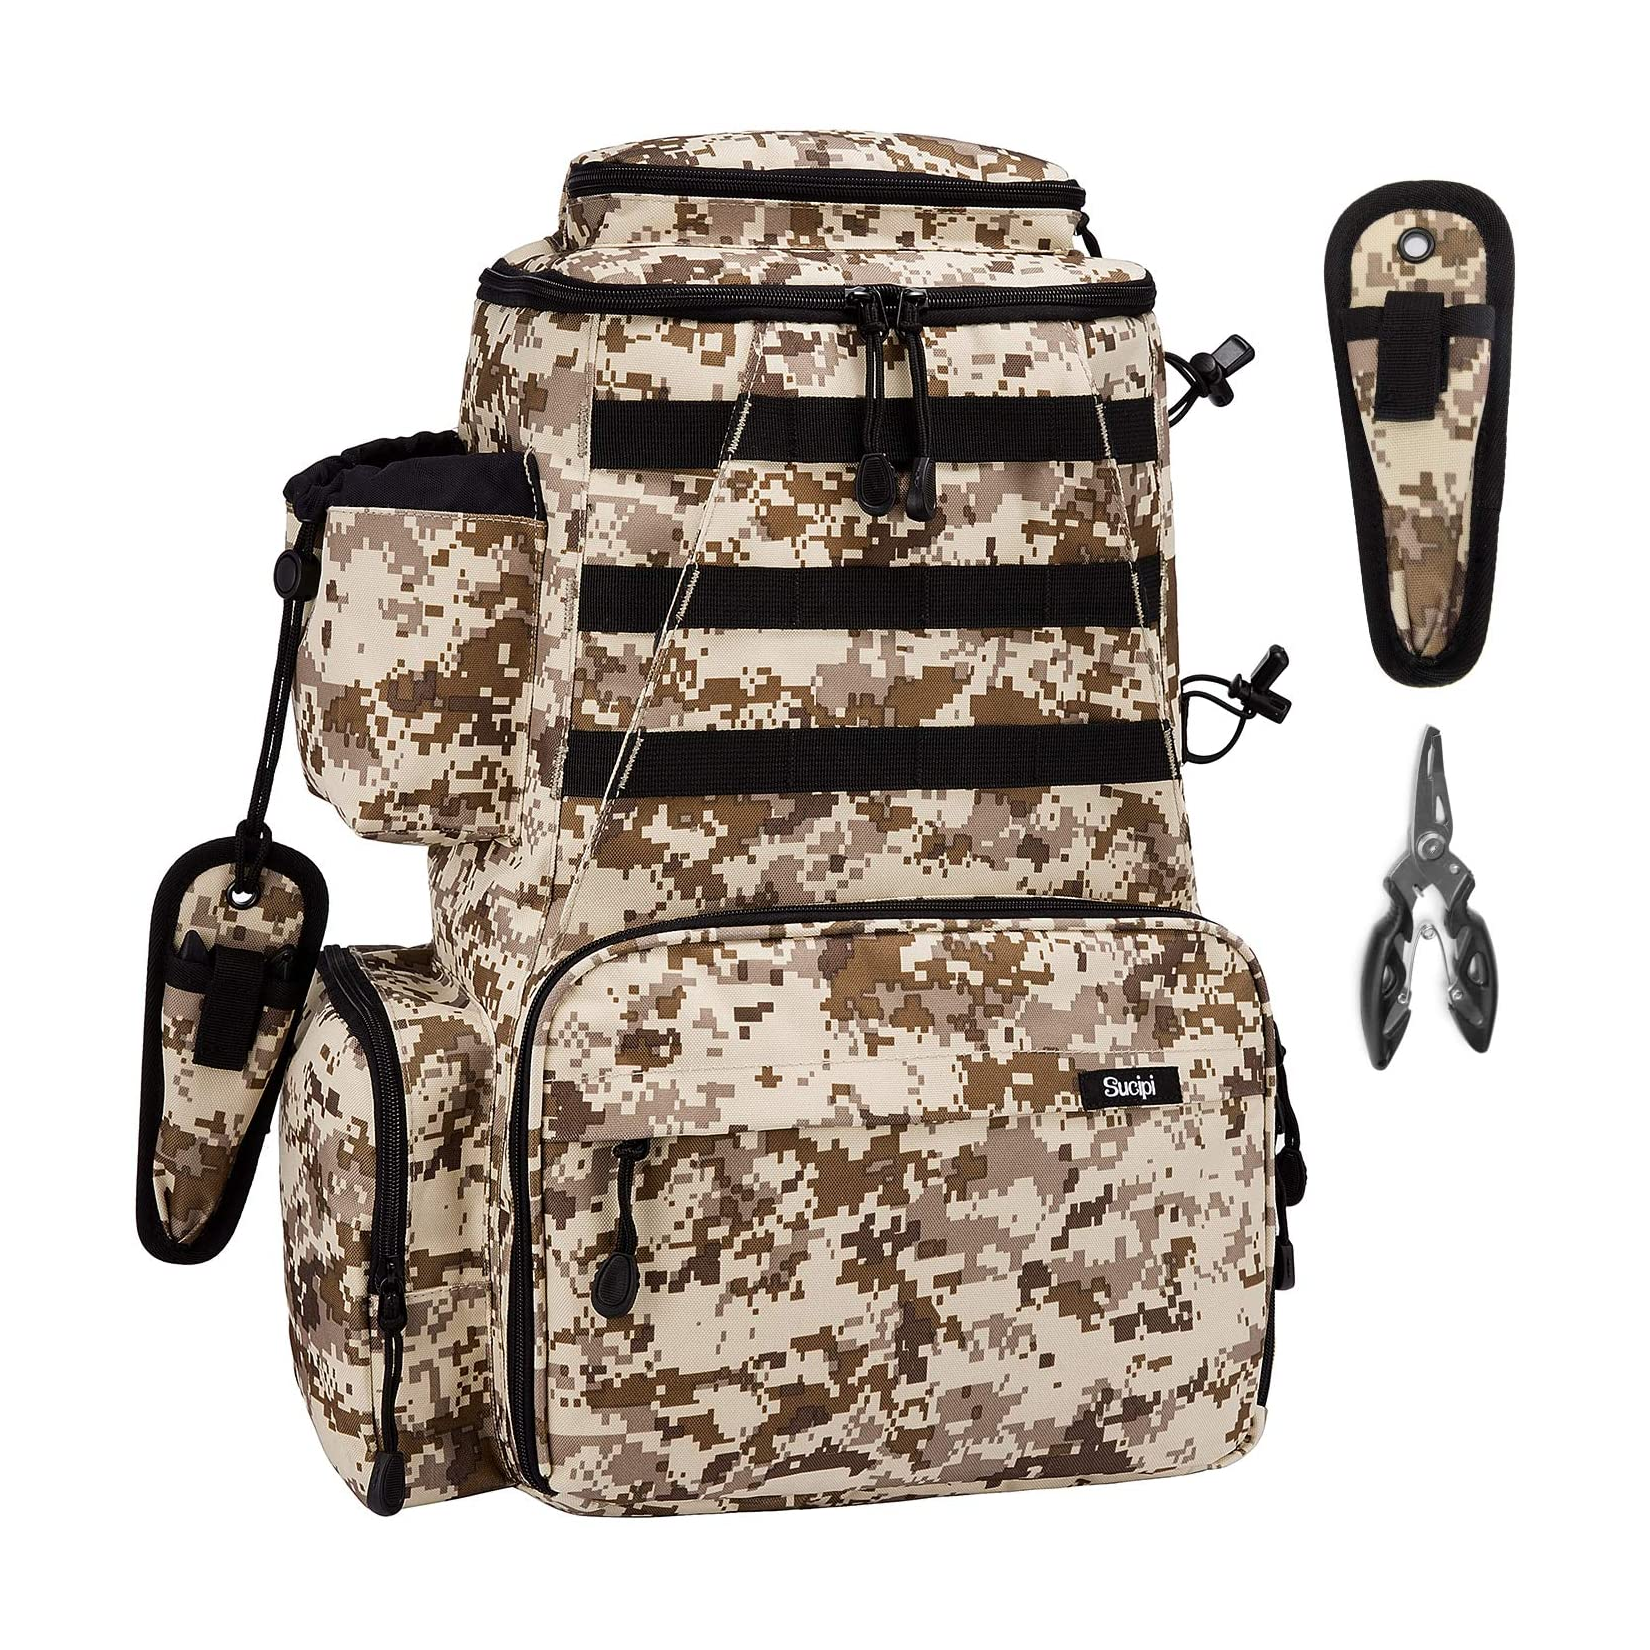 https://backpacks.global/compare/wp-content/uploads/Sucipi-Fishing-Tackle-Backpack-Front-View.png